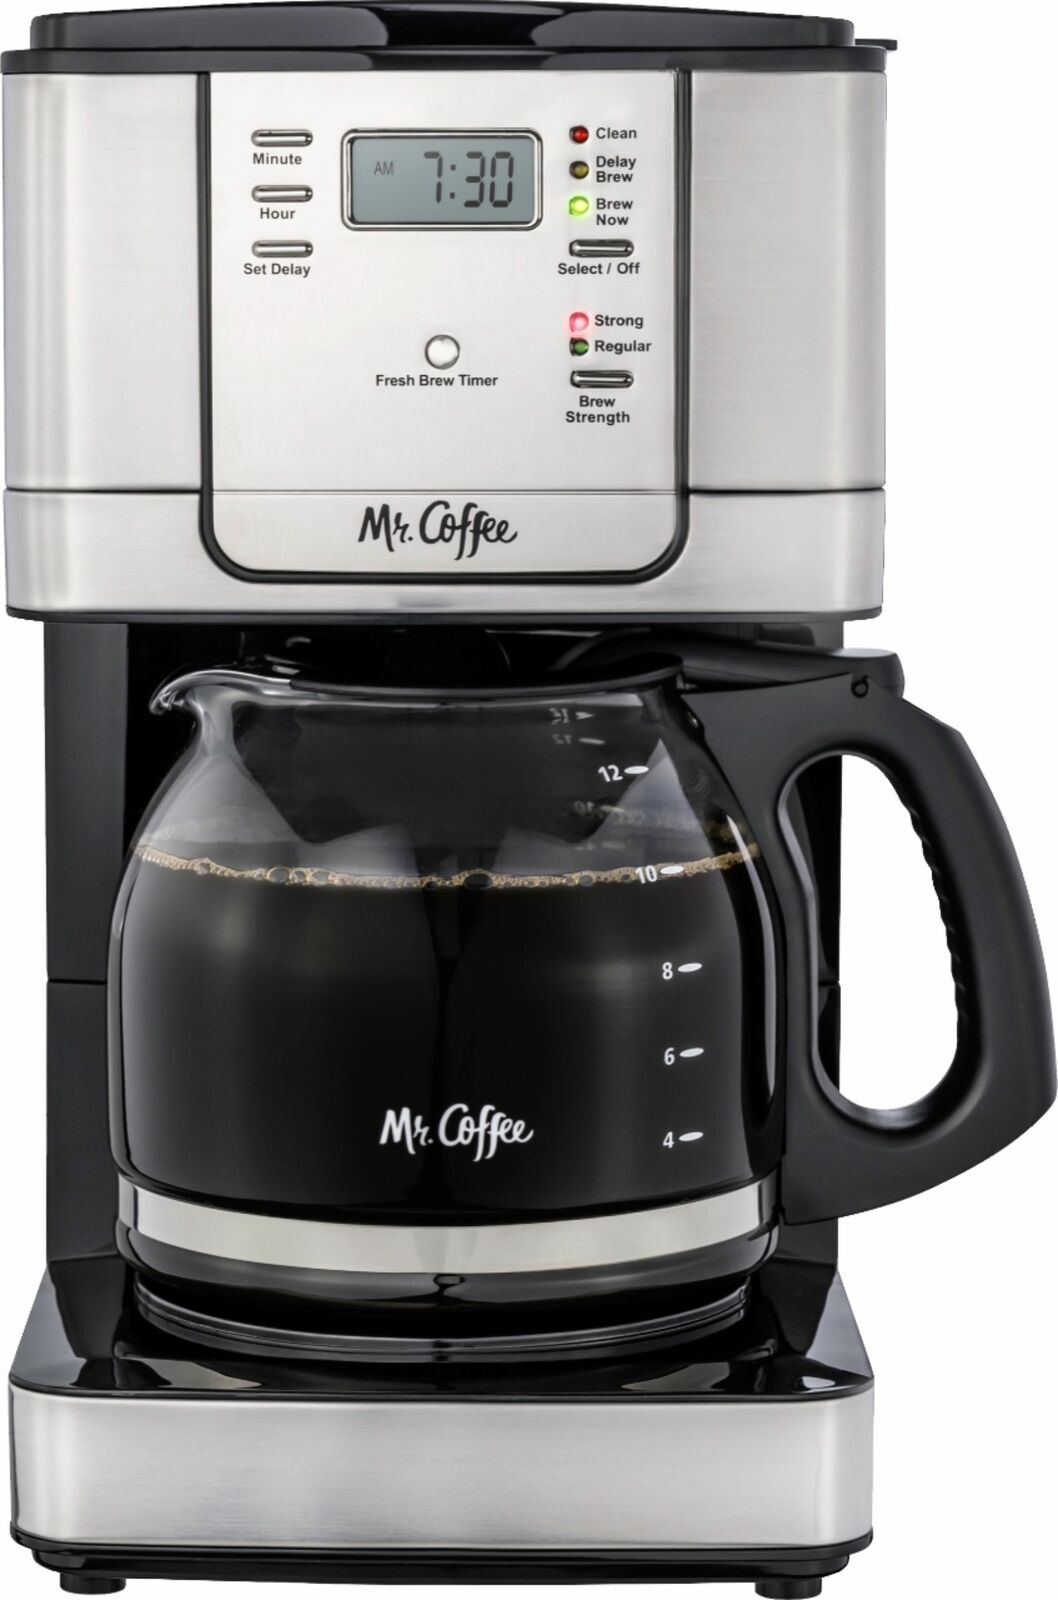 Mr. Coffee - 12-Cup Coffee Maker with Strong Brew Selector - Stainless Steel ON SALE AT BEST BUY!